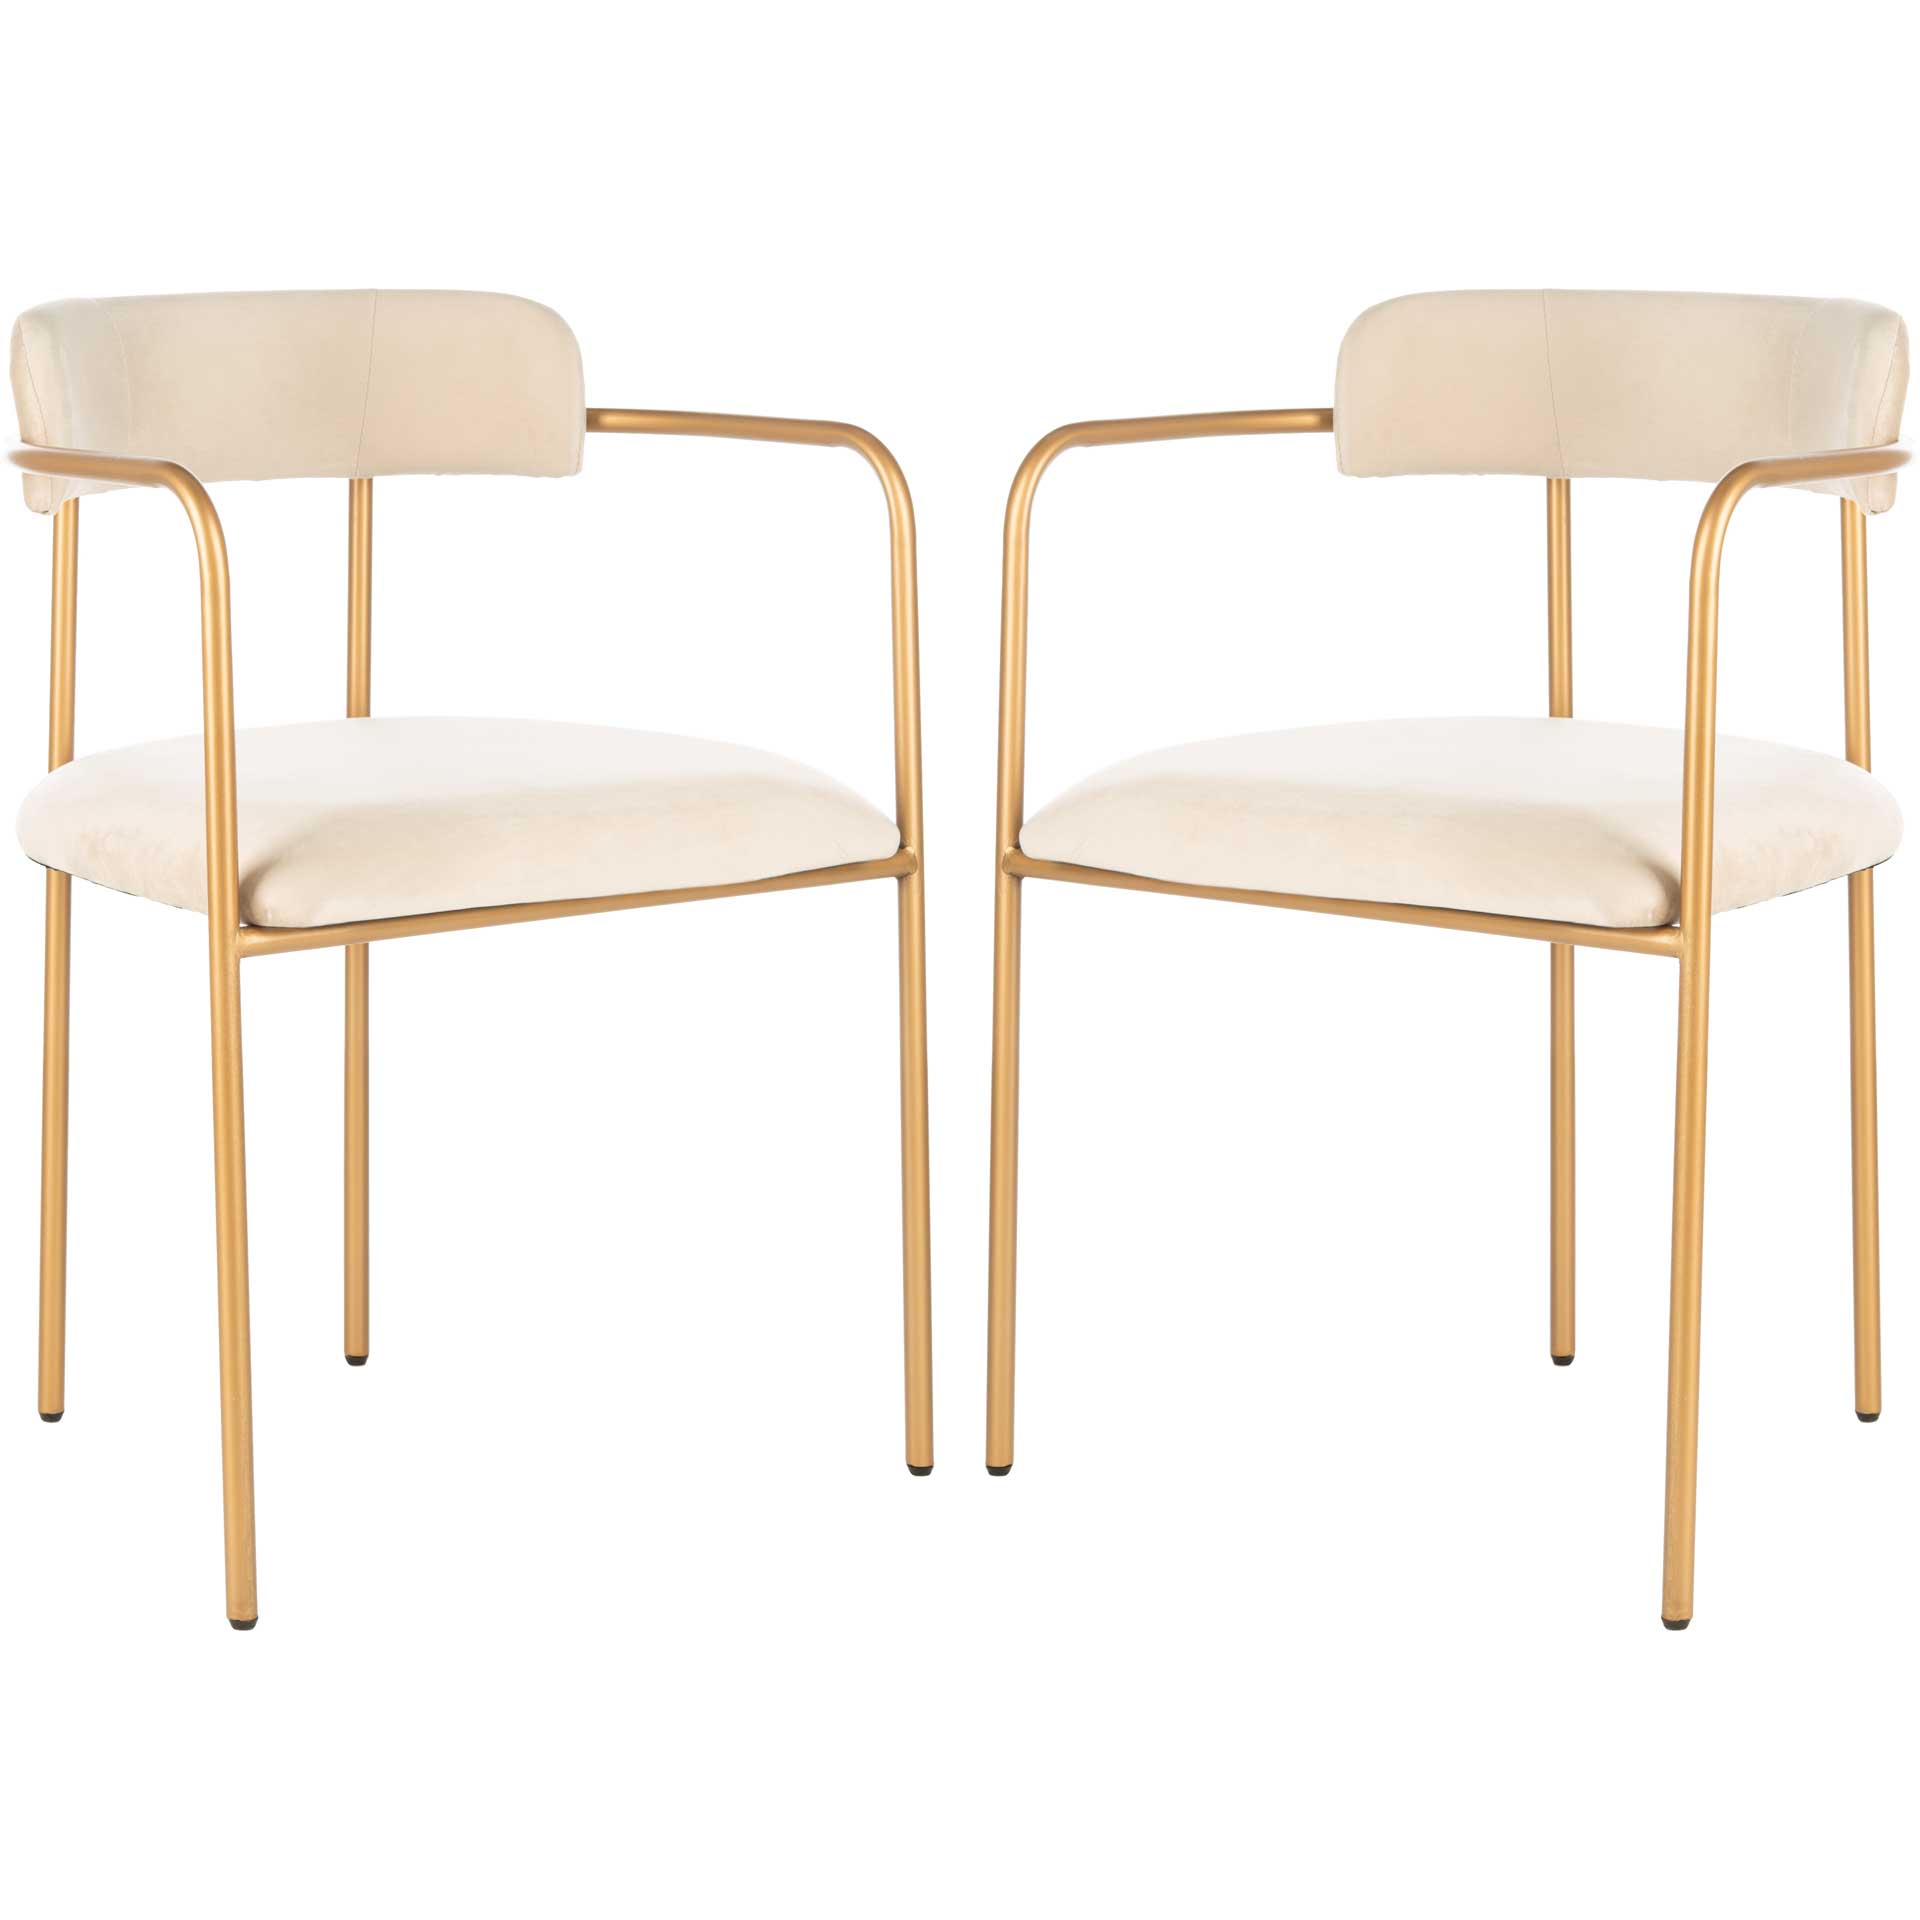 Callahan Side Chair Beige/Gold (Set of 2)